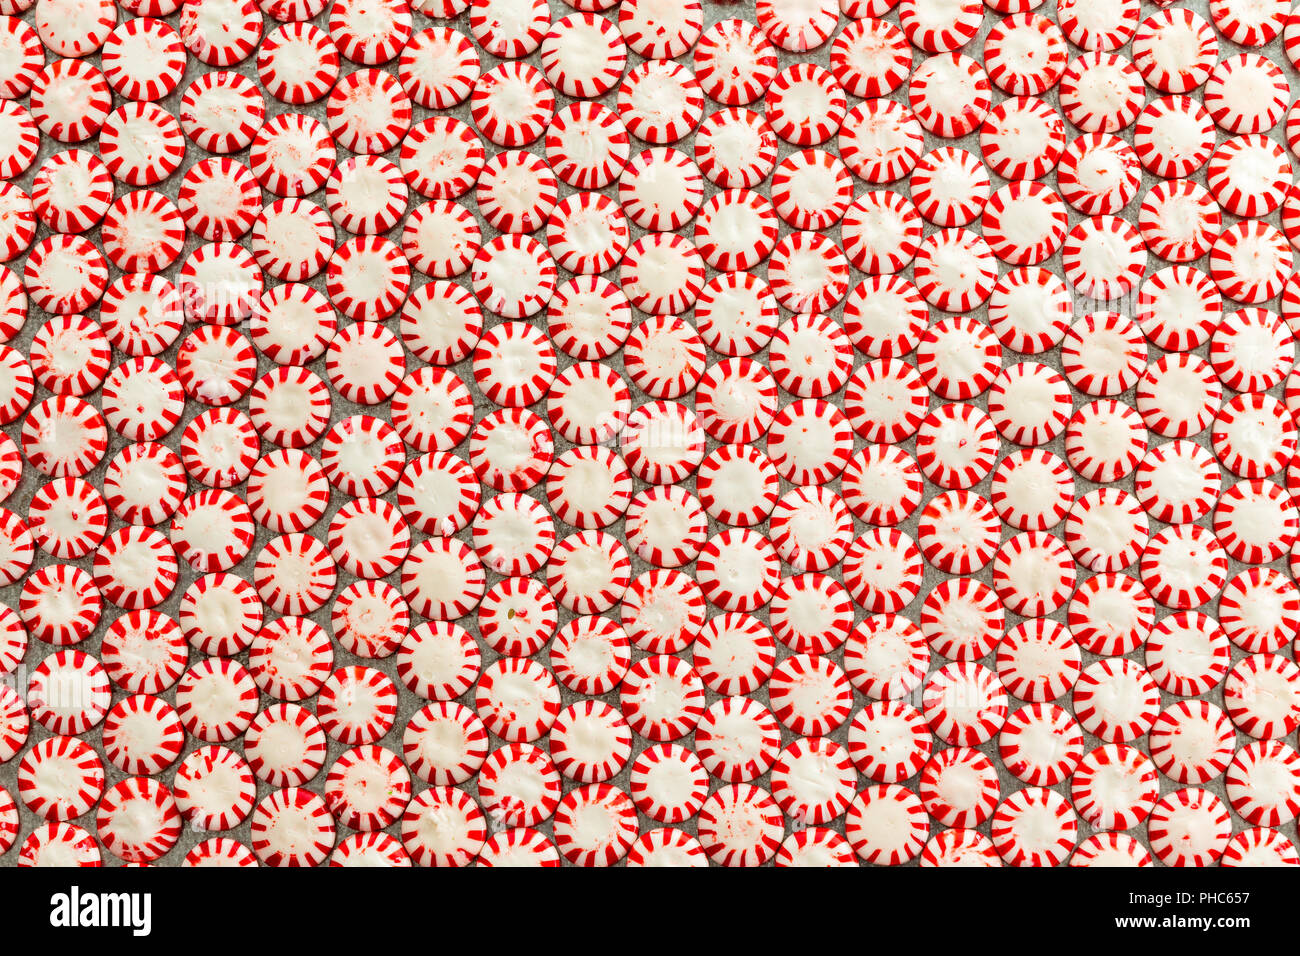 Background texture and pattern of colorful striped red and white peppermint flavored starlight candies packed closely together in a neat layer viewed  Stock Photo